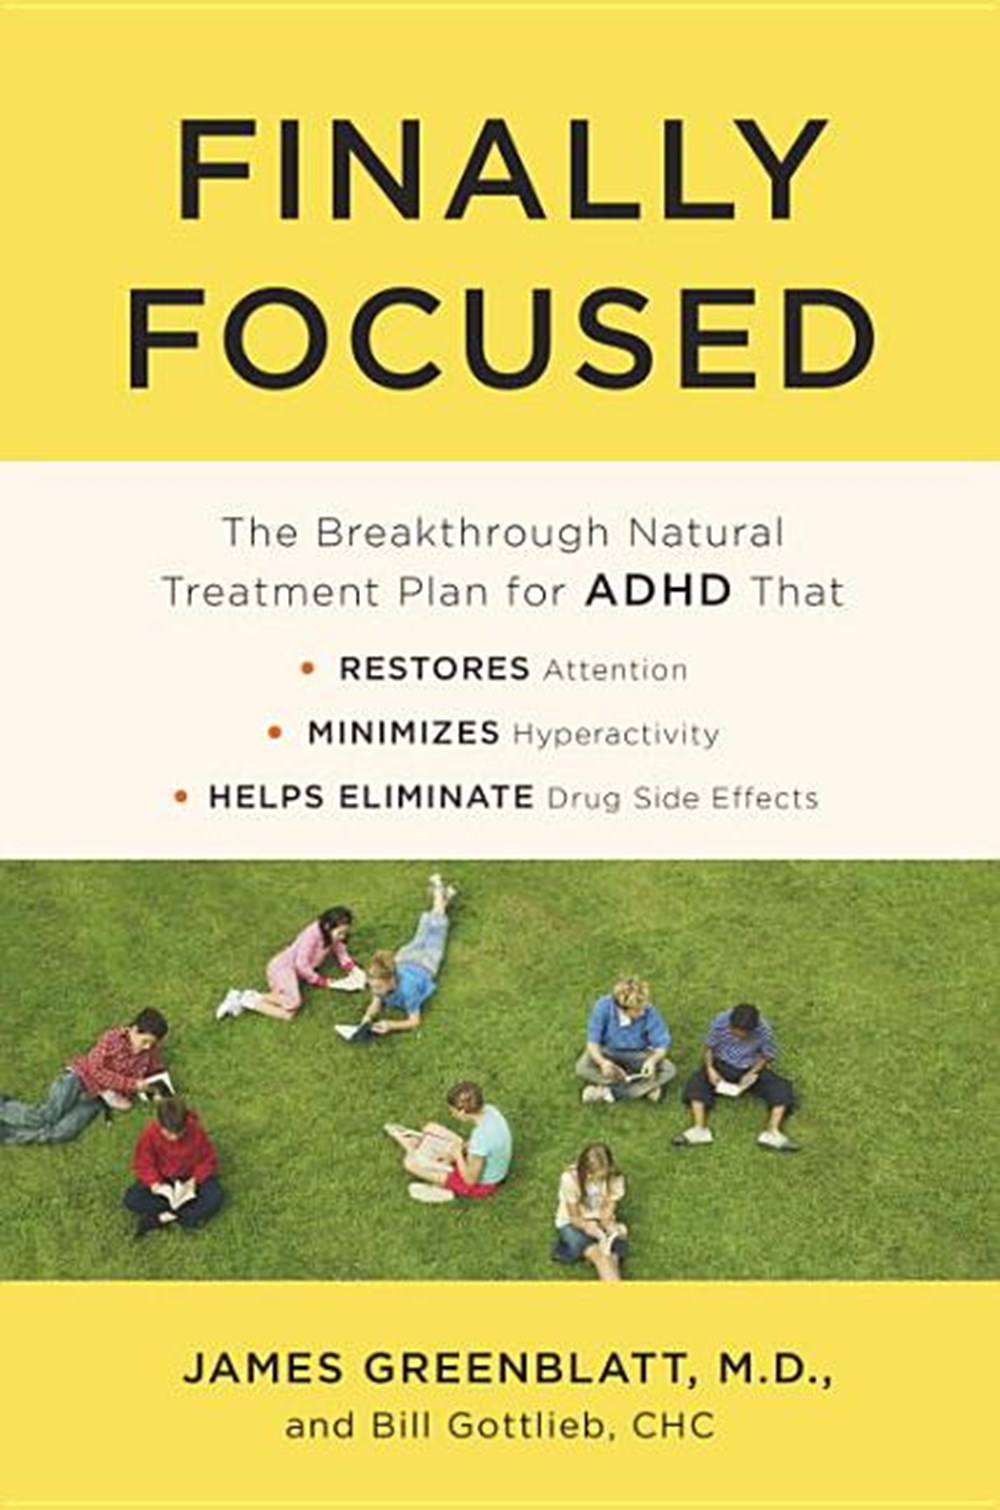 Finally Focused: The Breakthrough Natural Treatment Plan for ADHD That Restores Attention, Minimizes